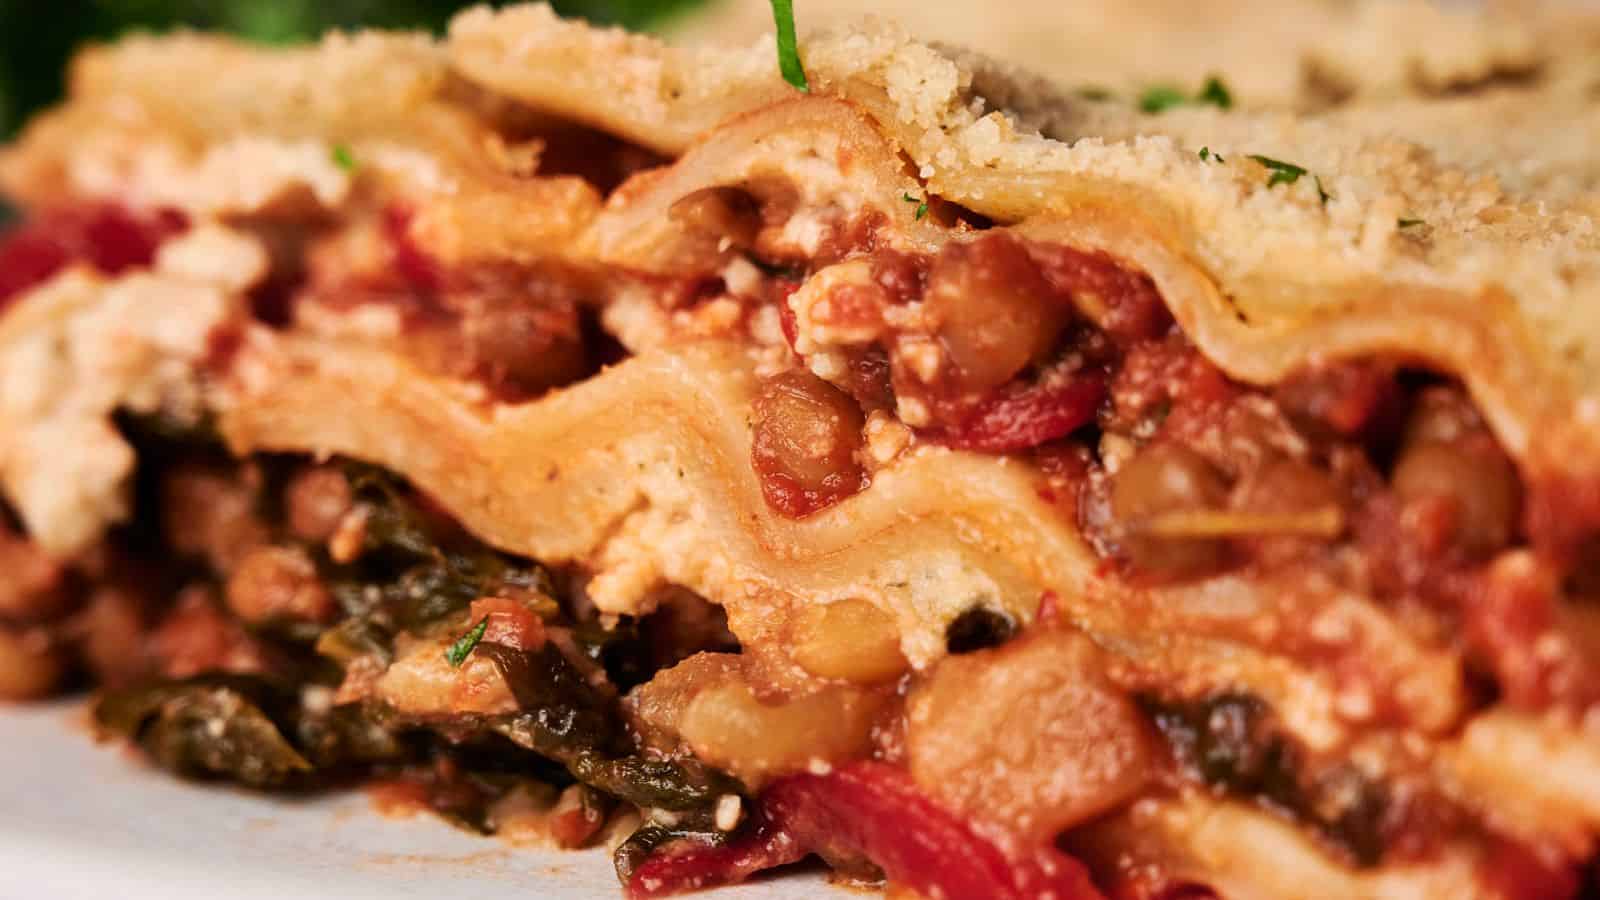 Close-up of a slice of vegetable lasagna showing layers of pasta, assorted vegetables, ricotta cheese, and tomato sauce with a breadcrumb topping.